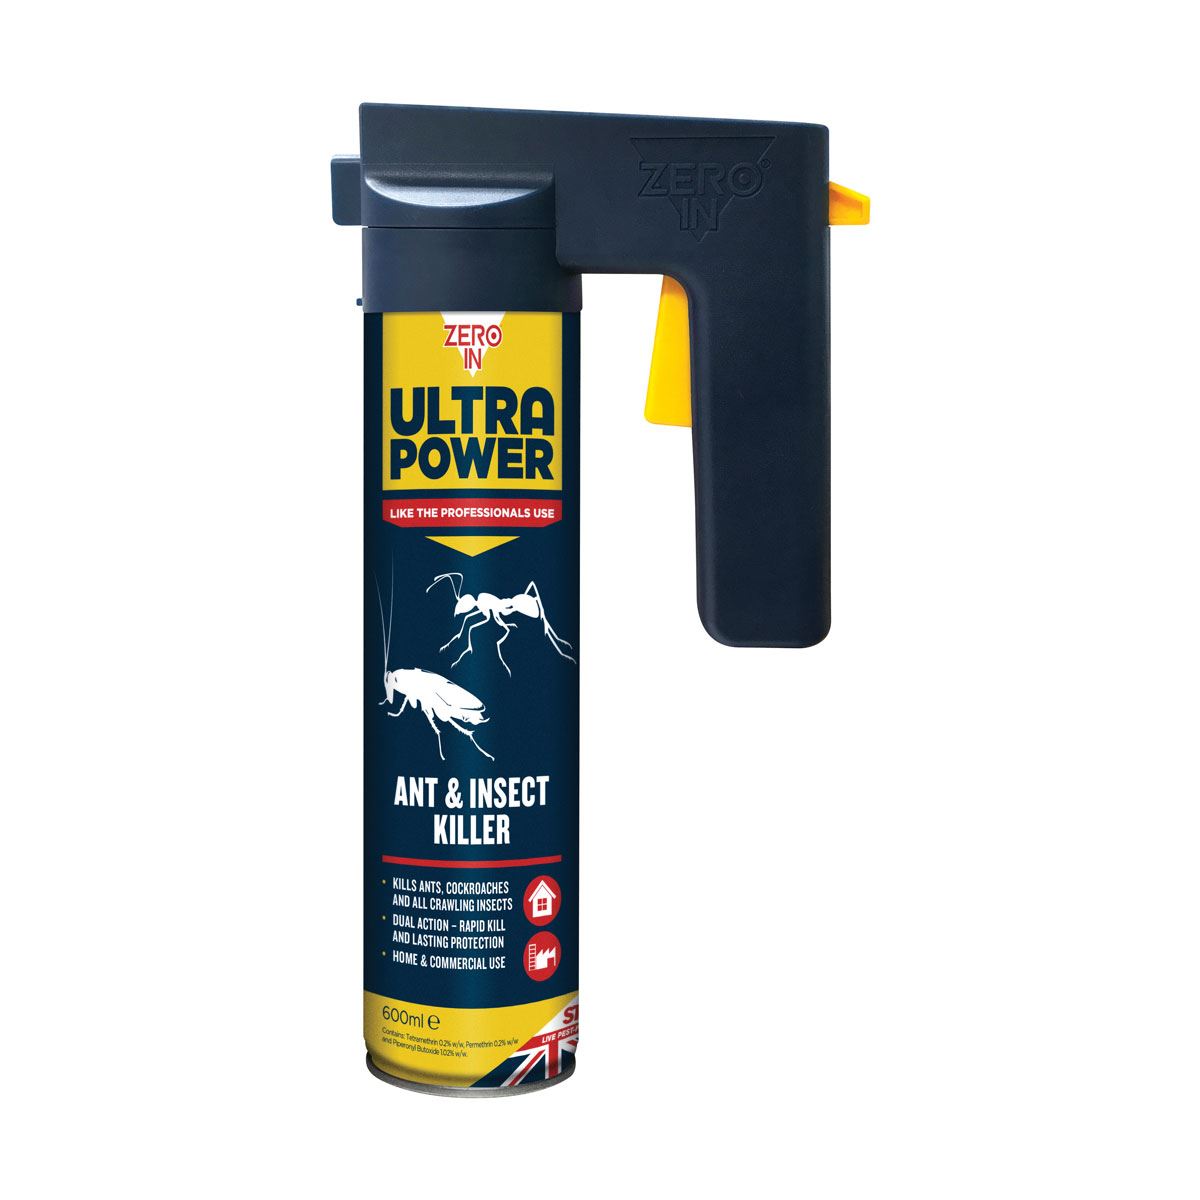 Zero In Ultra Power Ant & Crawling Insect Killer - Just Horse Riders